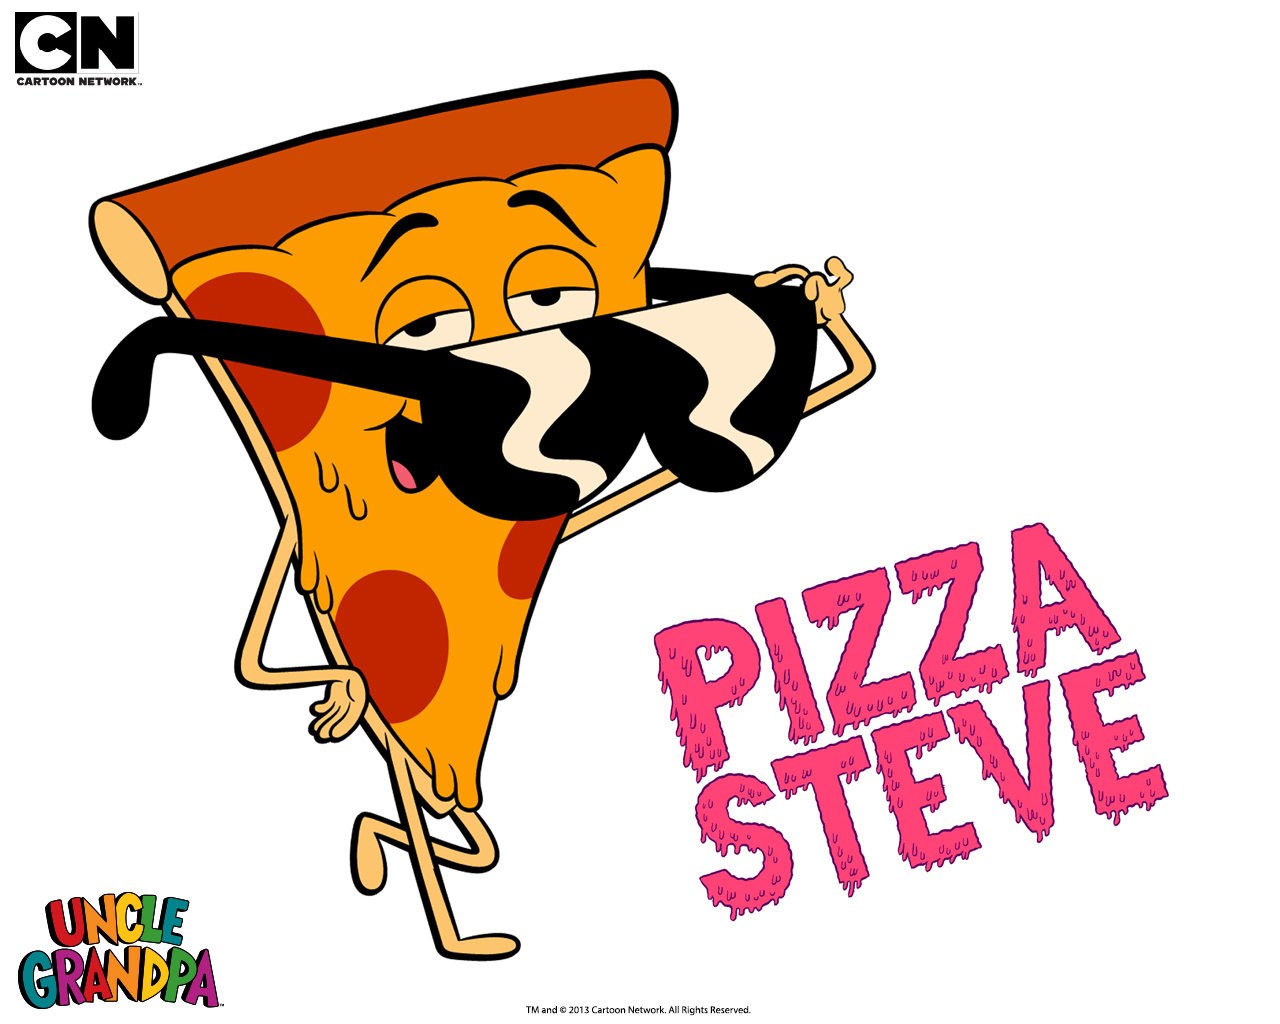 Cartoon Network Hd Wallpapers, For Free Download - Pizza Steve - 1280x1024  Wallpaper 